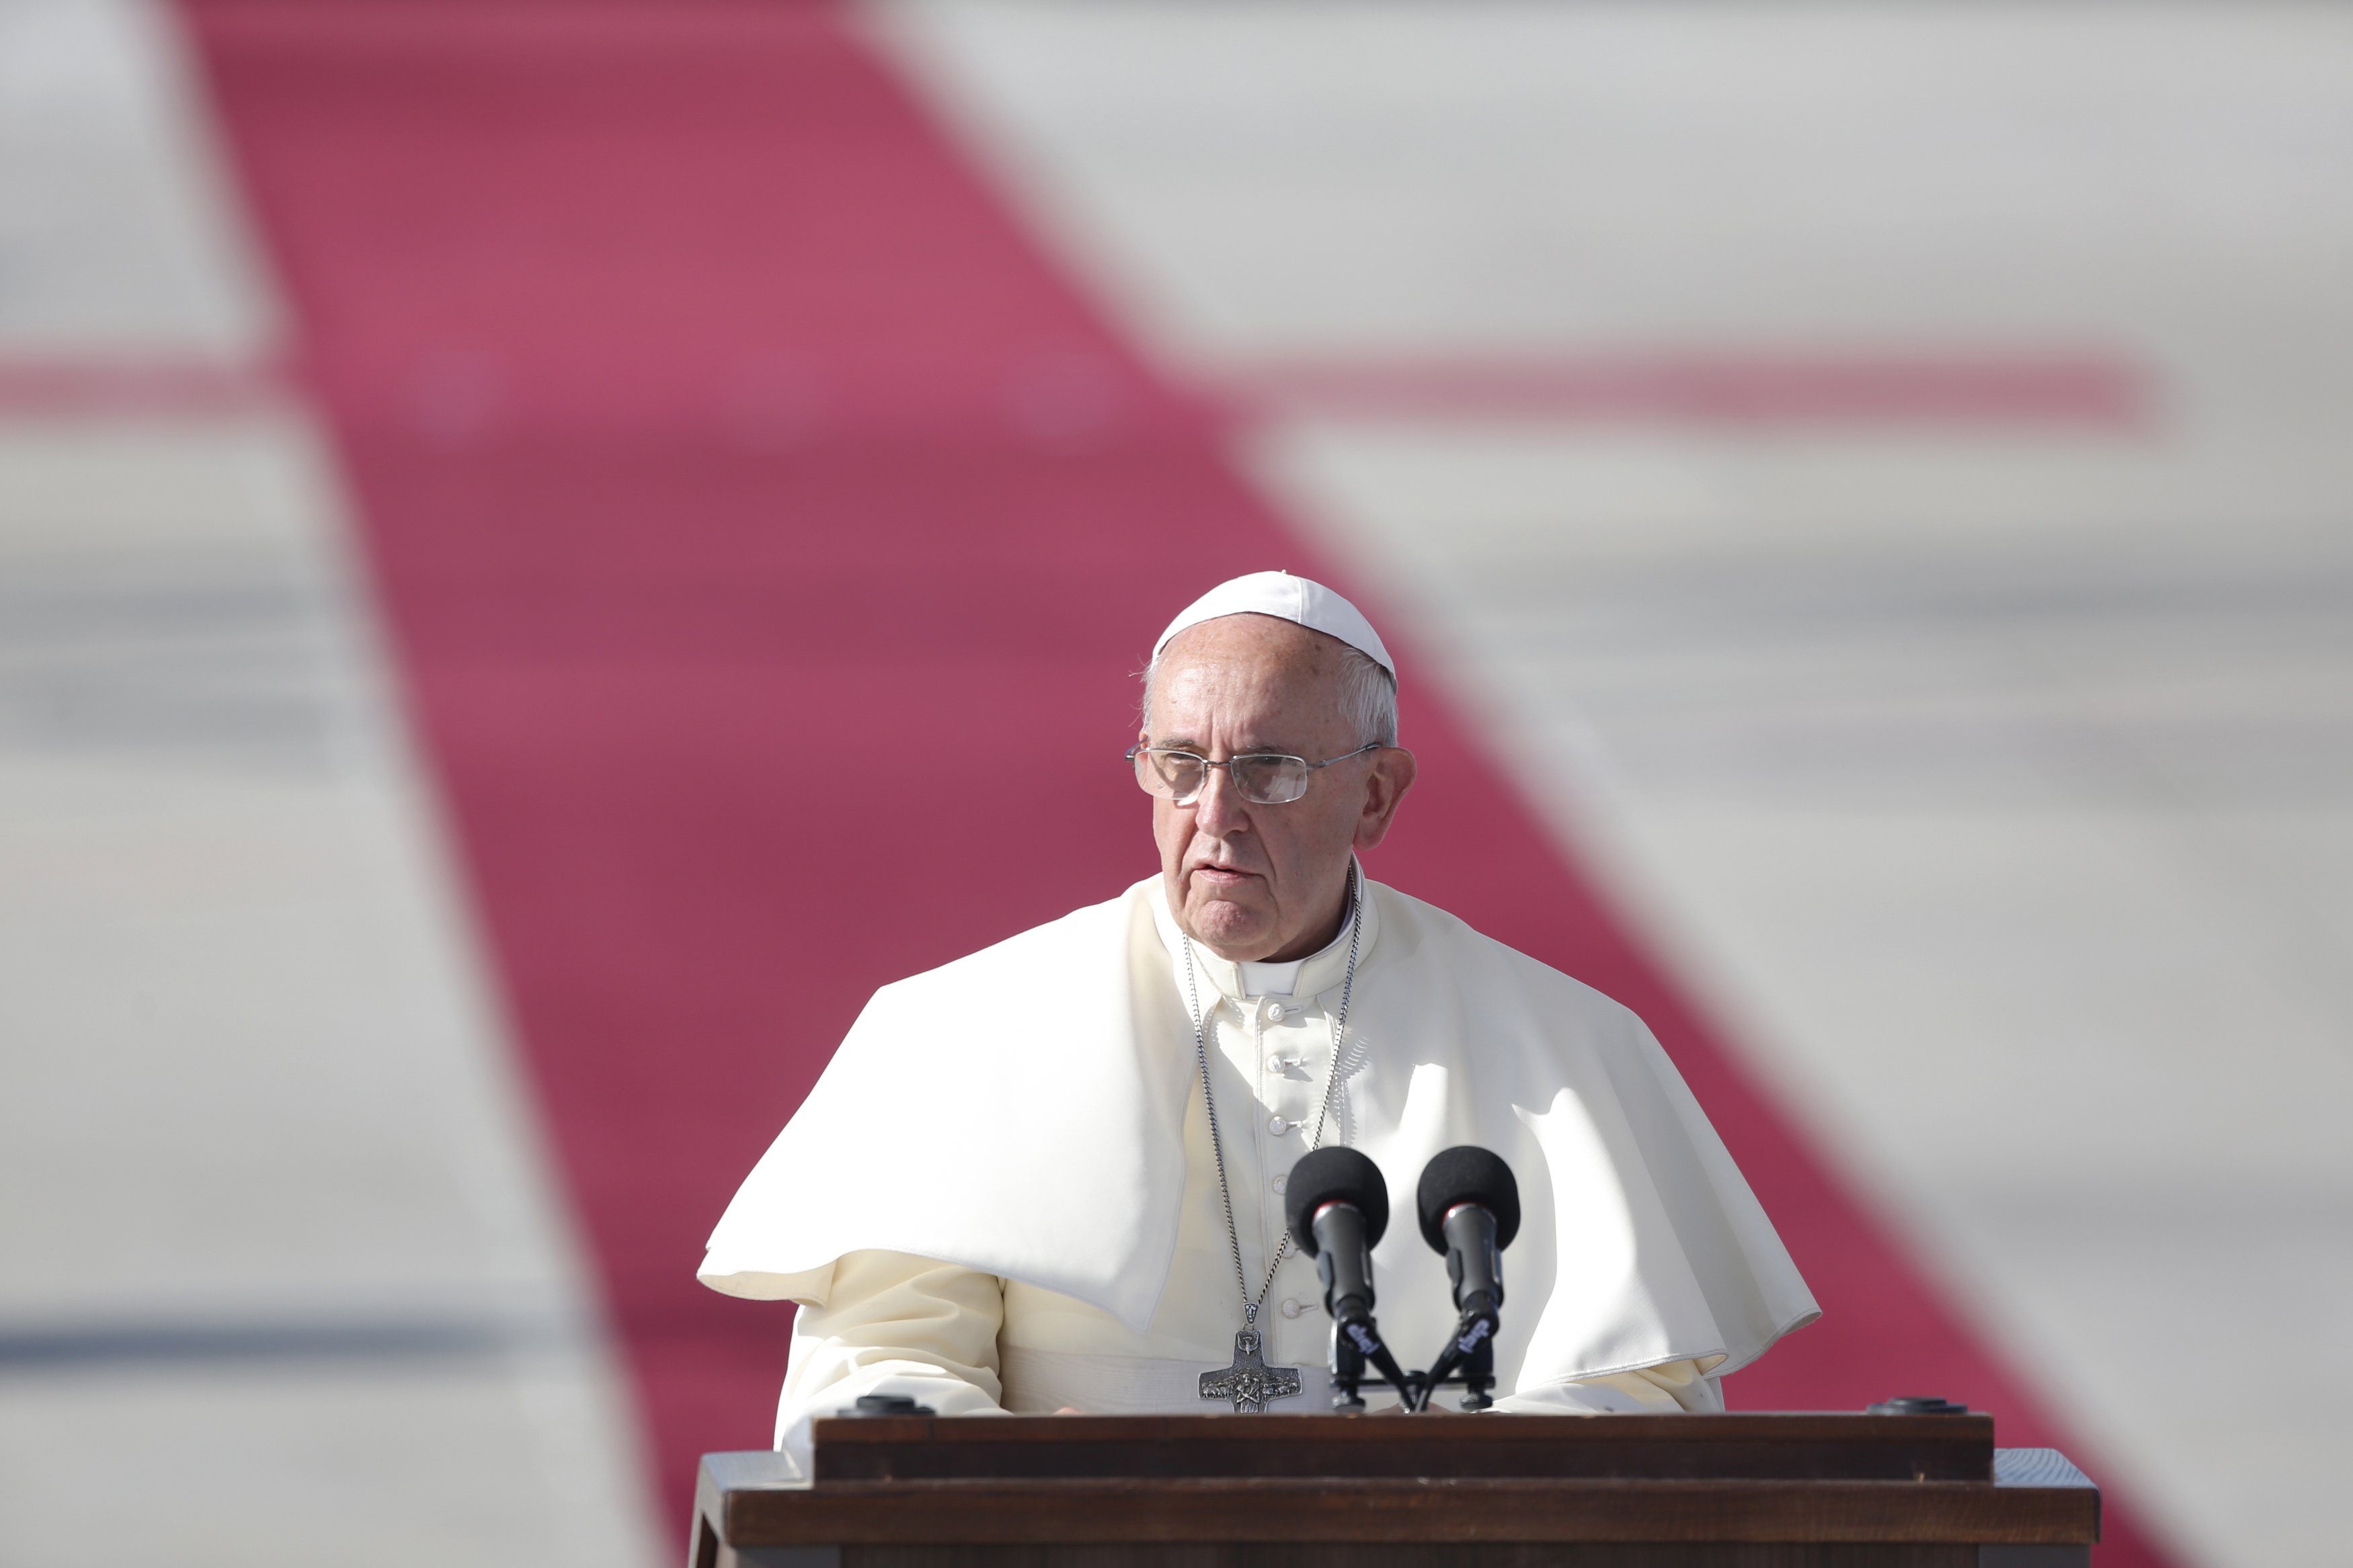 Pope Francis speaks during a welcoming ceremony at Ben Gurion airport near Tel Aviv